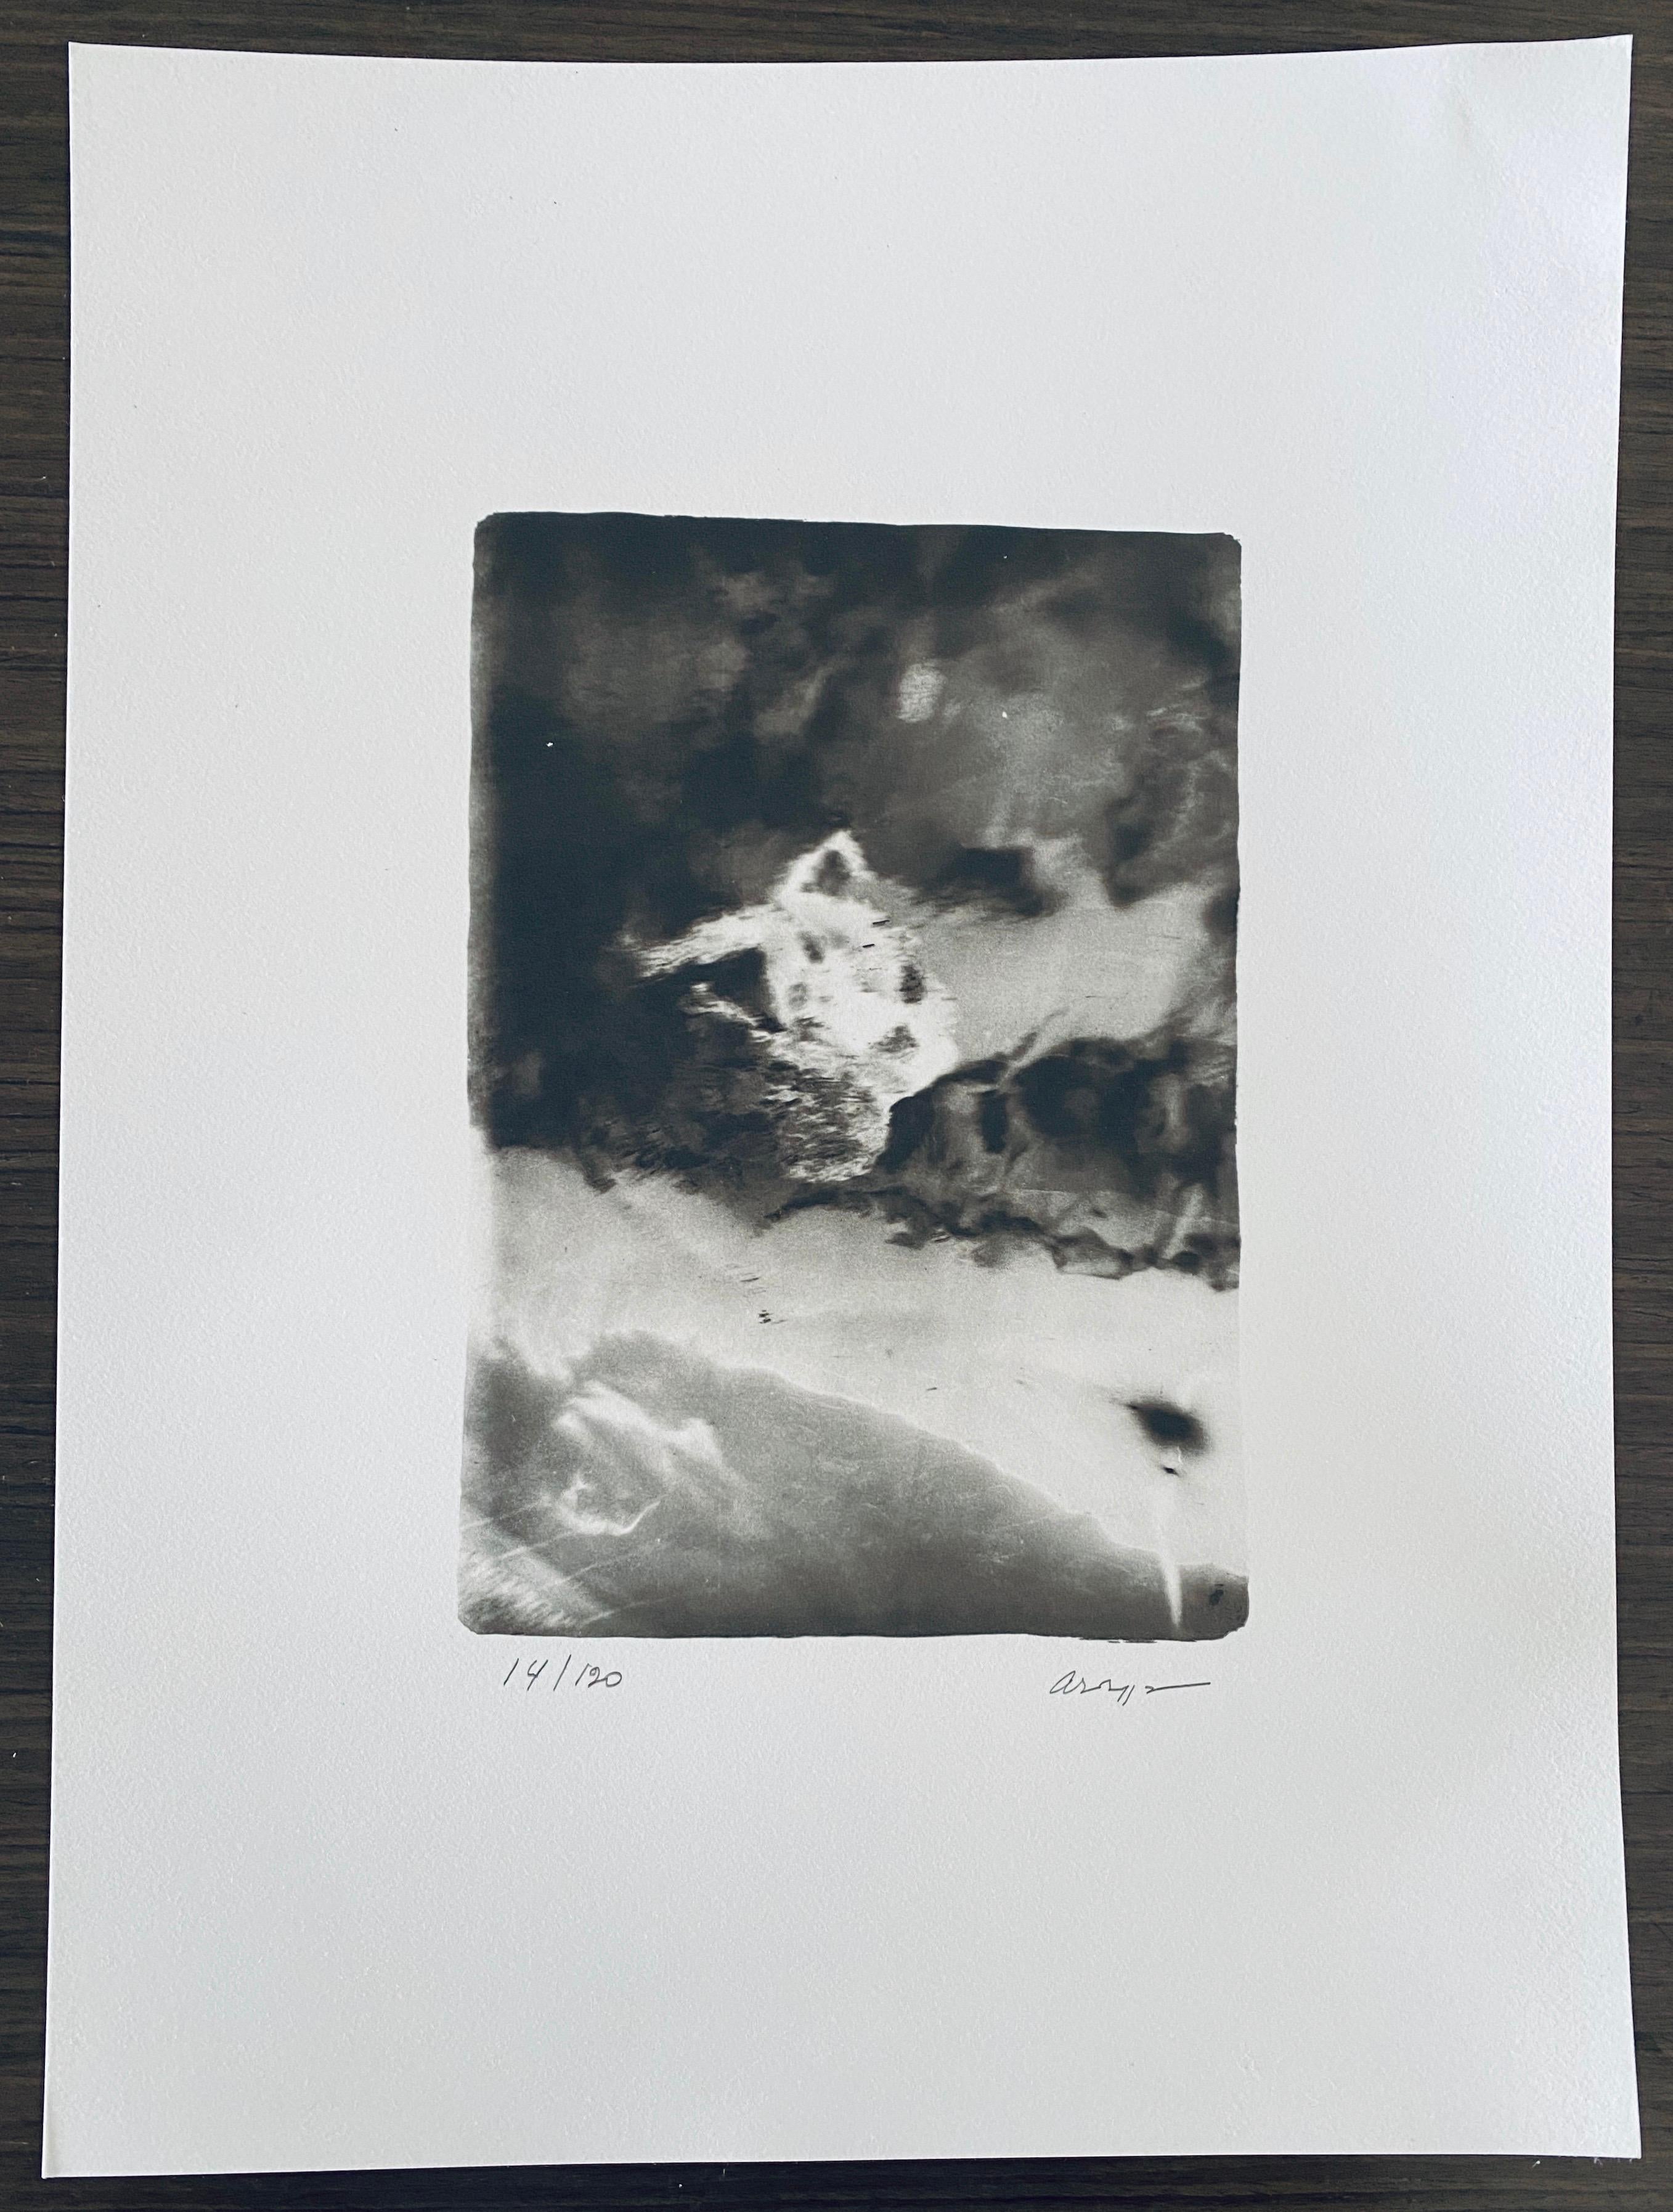 Photos pictured of information cards after the images of the black and white photos are not included. 

La Chute D'Icare (The Fall of Icarus) is a original, black and white photographic image by the French Photographer André Naggar printed in